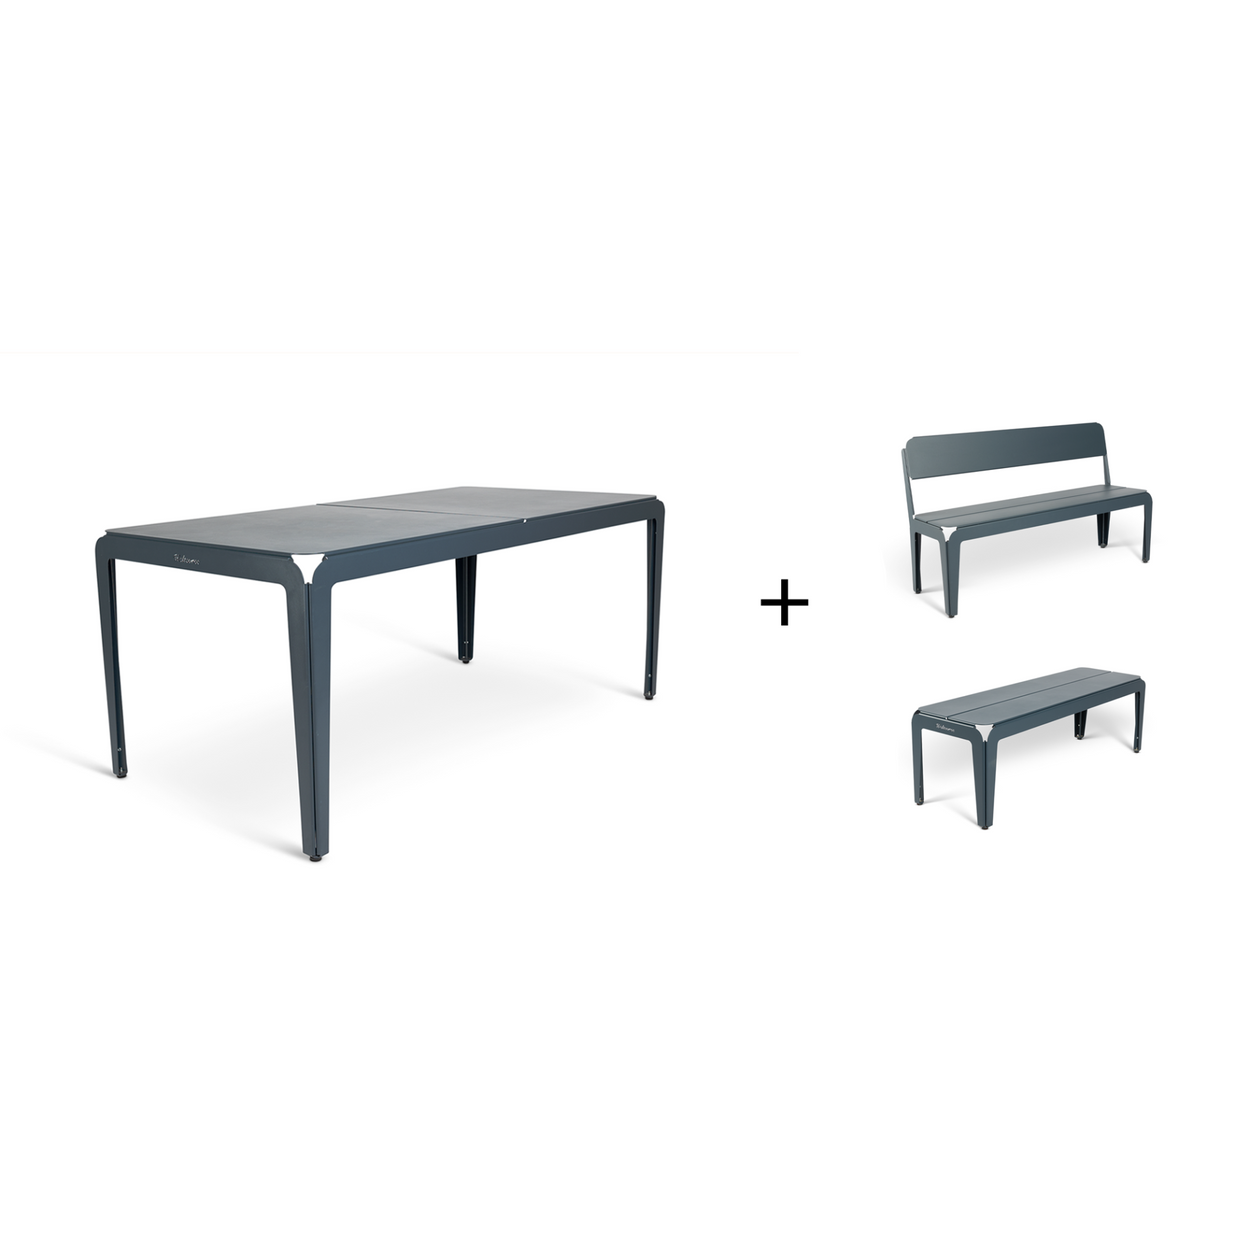 Bended table 180 inclusief benches - 3 combinaties